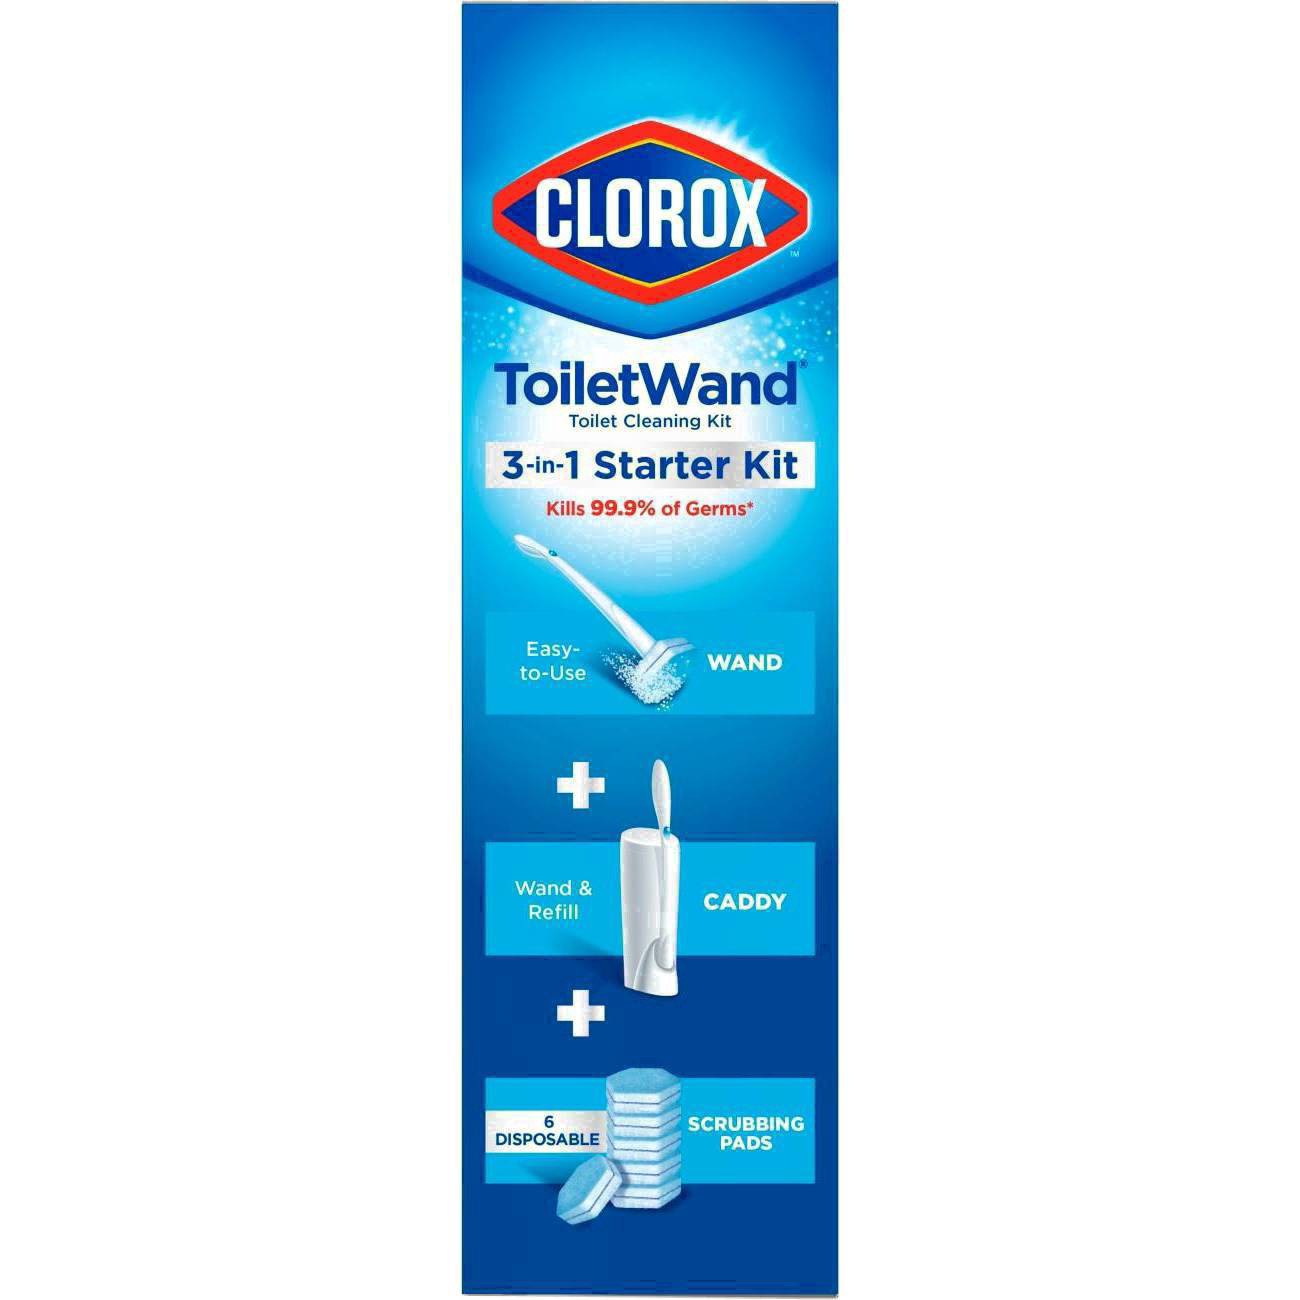 slide 89 of 176, Clorox Toilet Wand 3-in-1 Starter Toliet Cleaning Kit, 1 ct